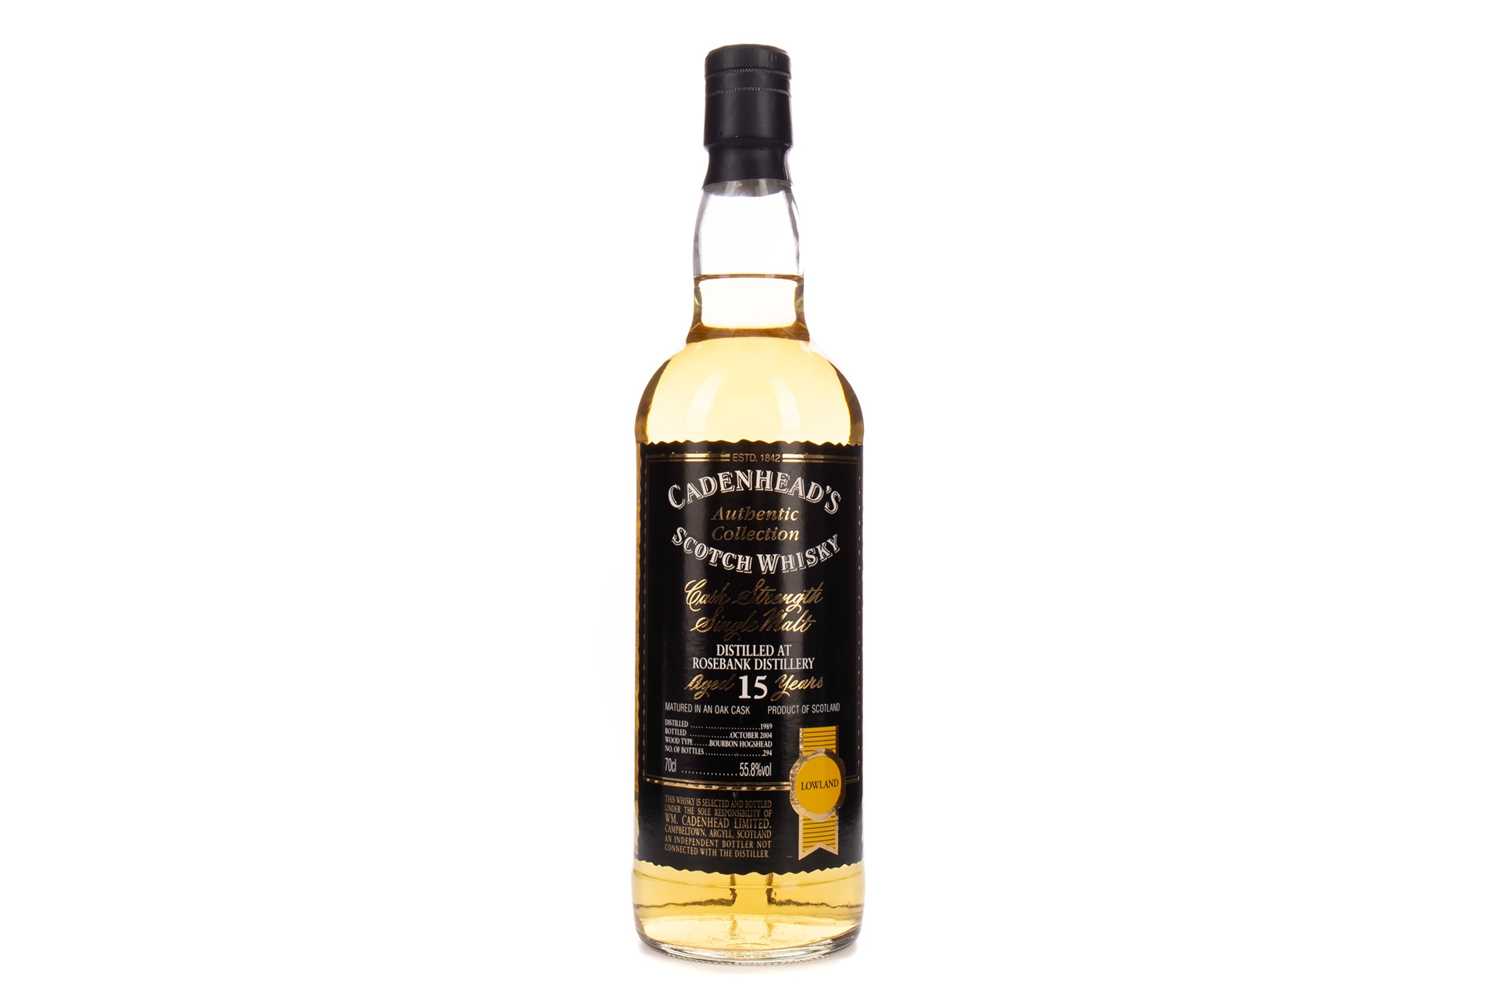 Lot 73 - ROSEBANK 1989 CADENHEAD'S AUTHENTIC COLLECTION AGED 15 YEARS